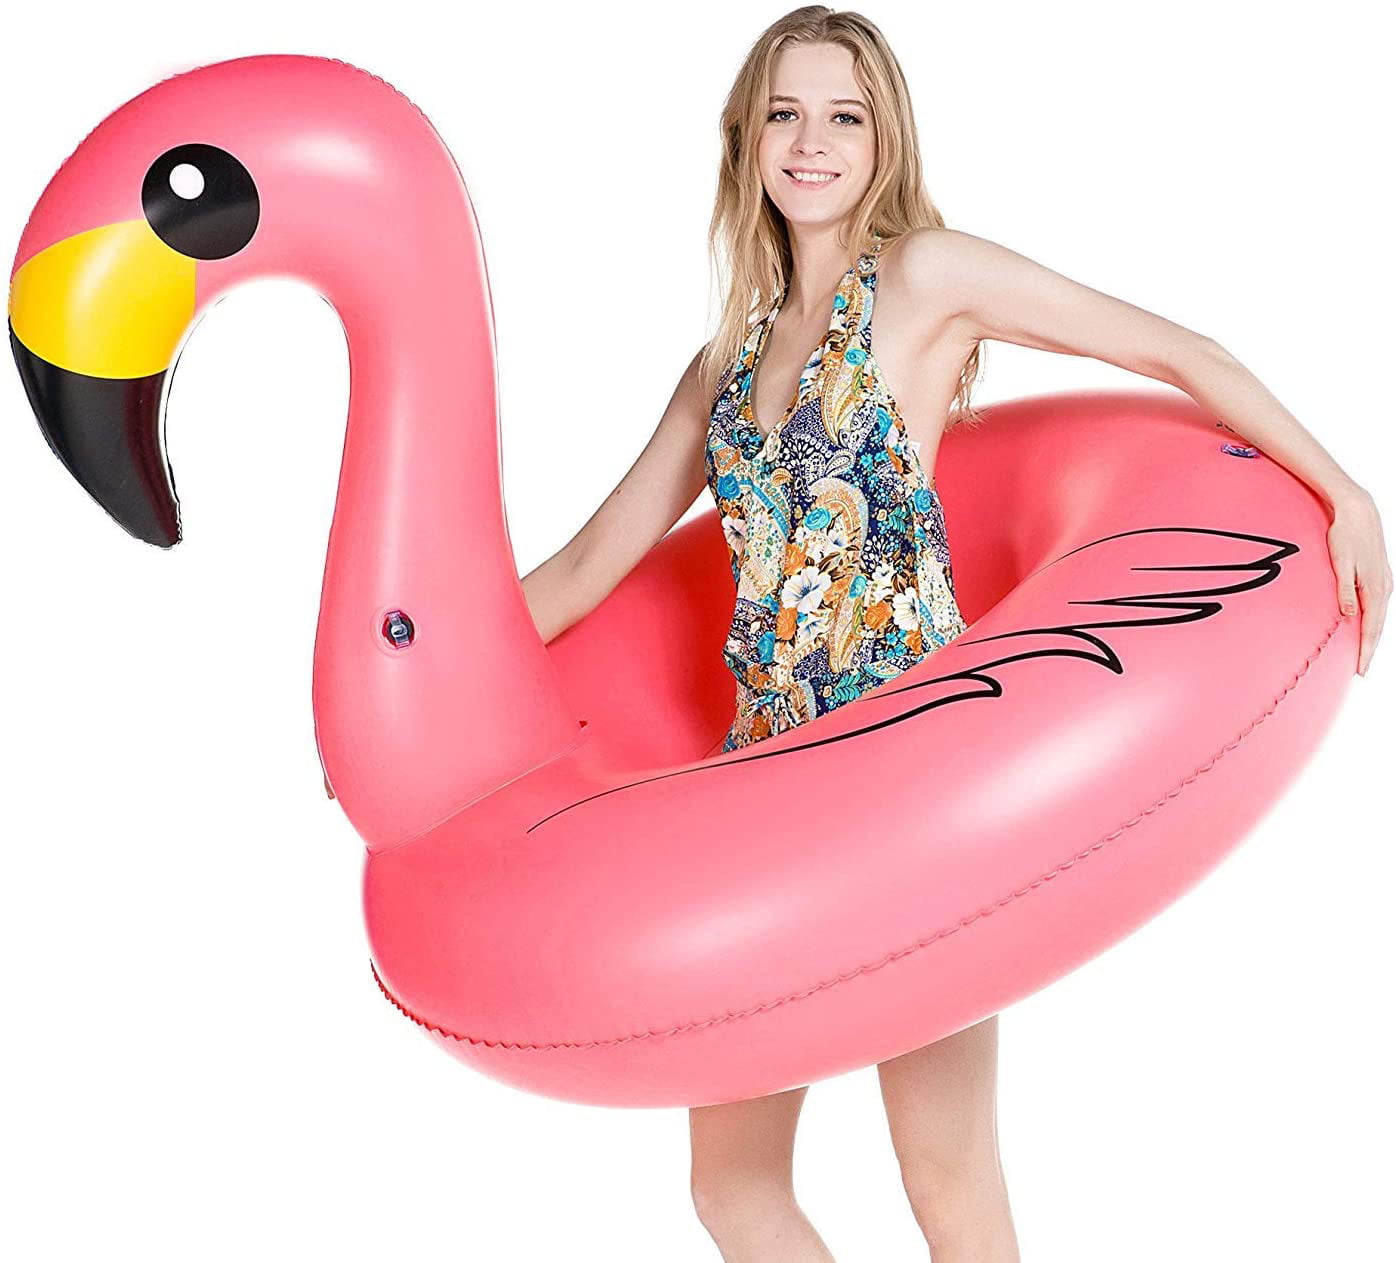 TYMX Giant Inflatable Pink Flamingo Pool Party Inflatable Float Raft PVC Material General Adult Children Summer Perfect Pool Beach Water Recreation Leisure Toys Pink Flamingo 